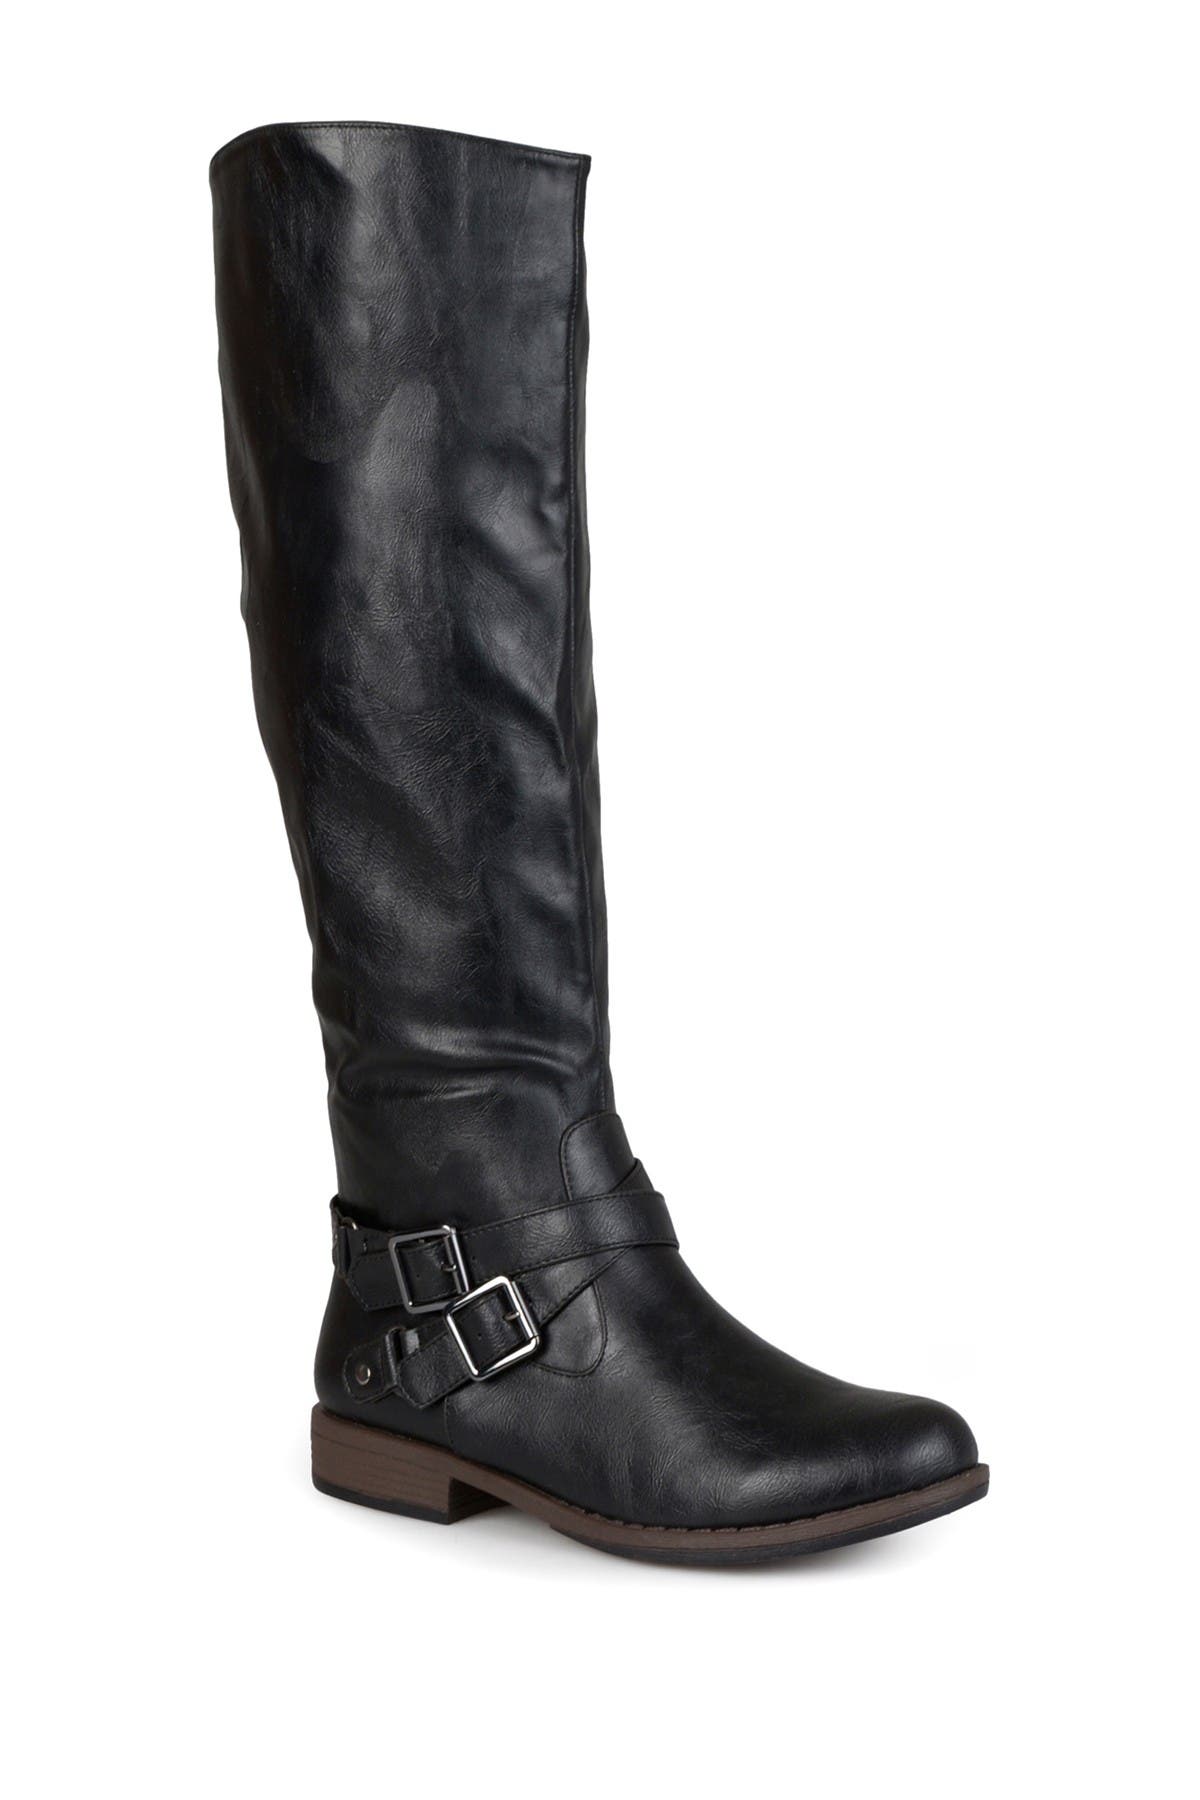 journee collection april riding boot